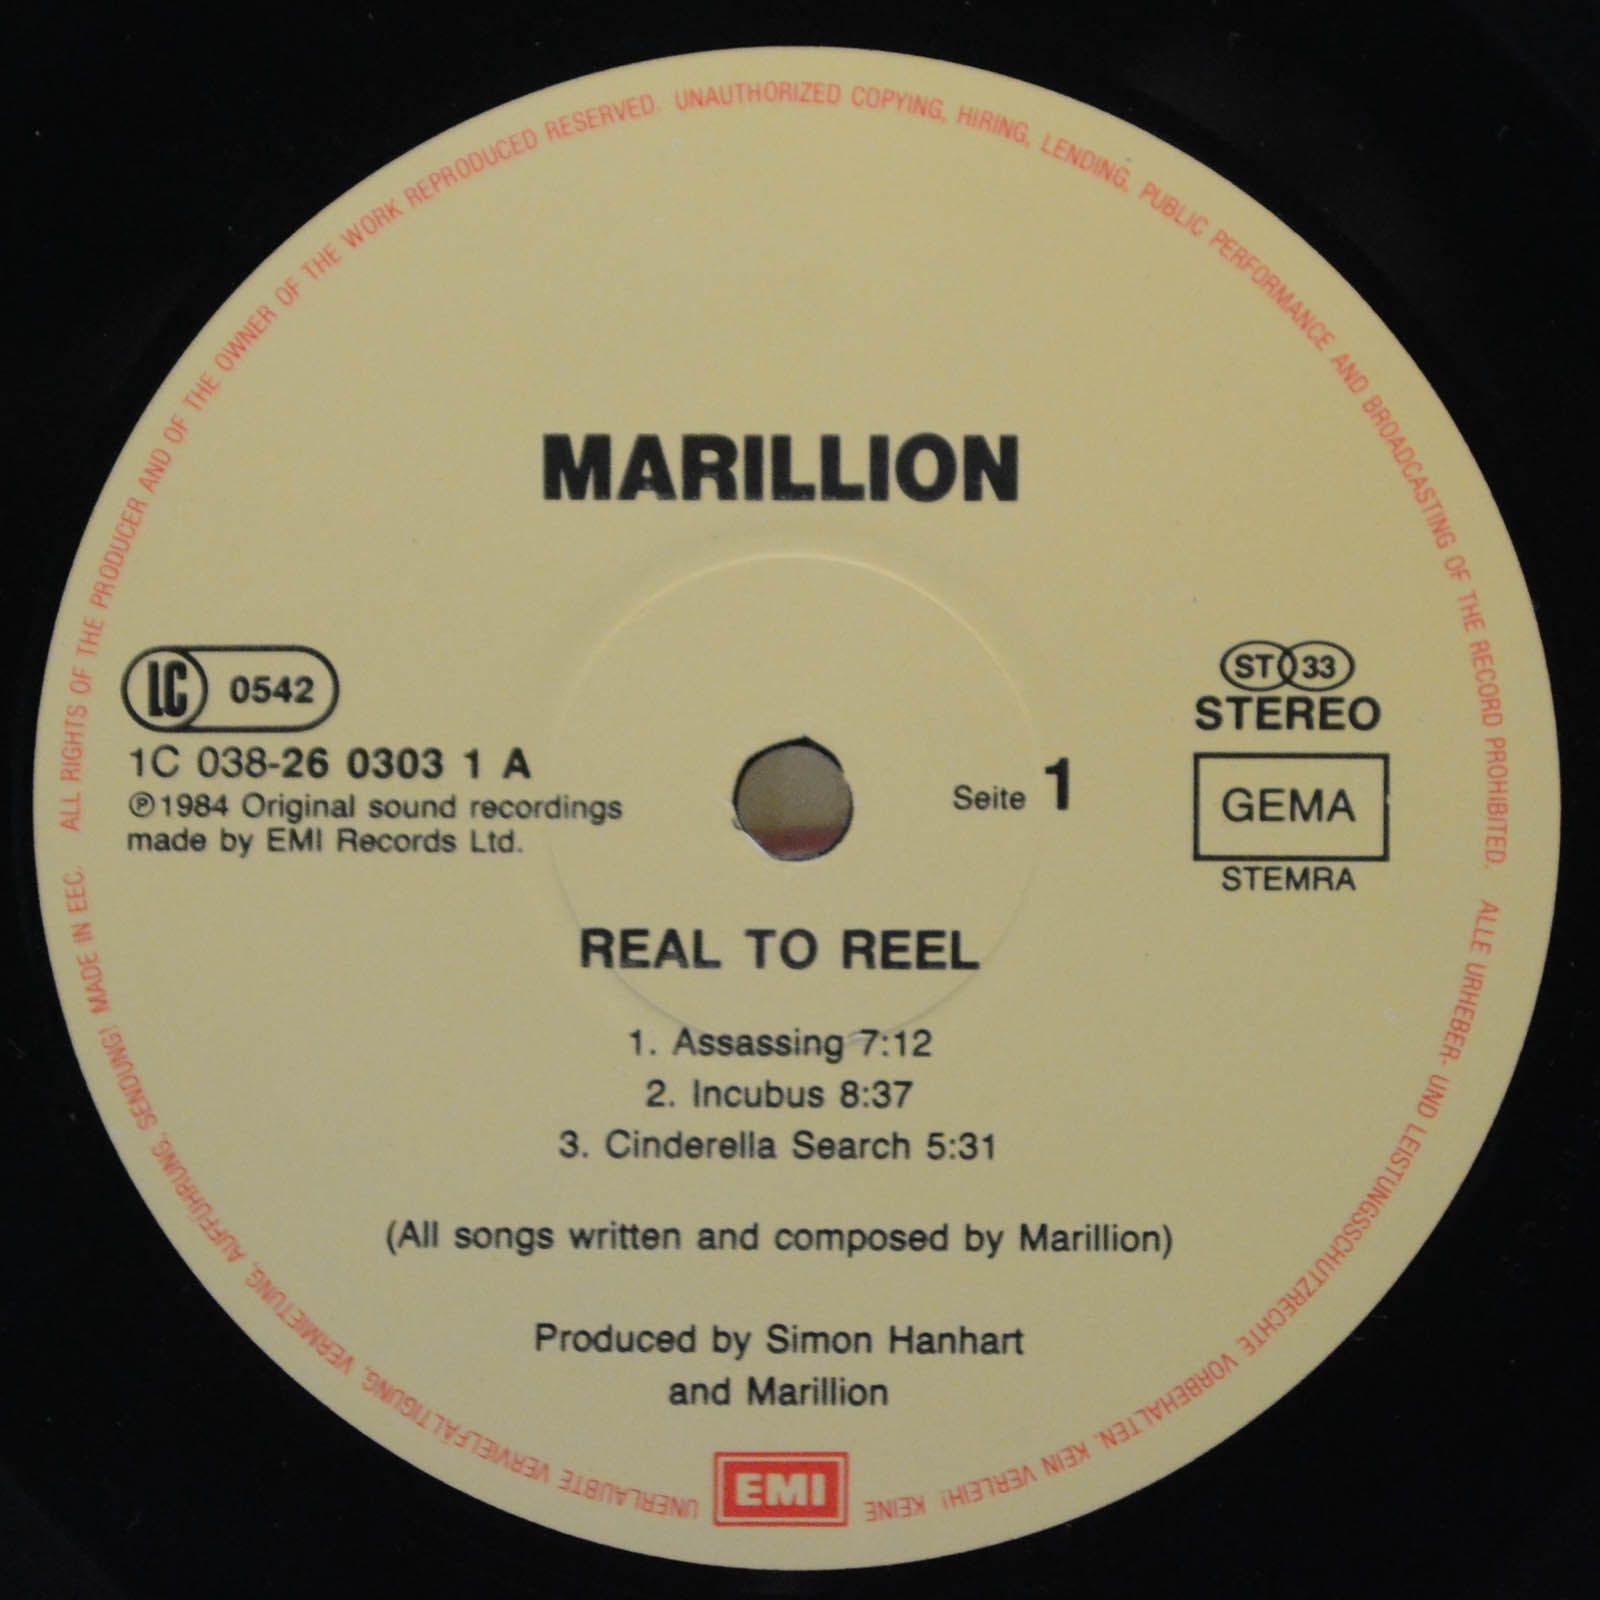 Marillion — Real To Reel, 1984